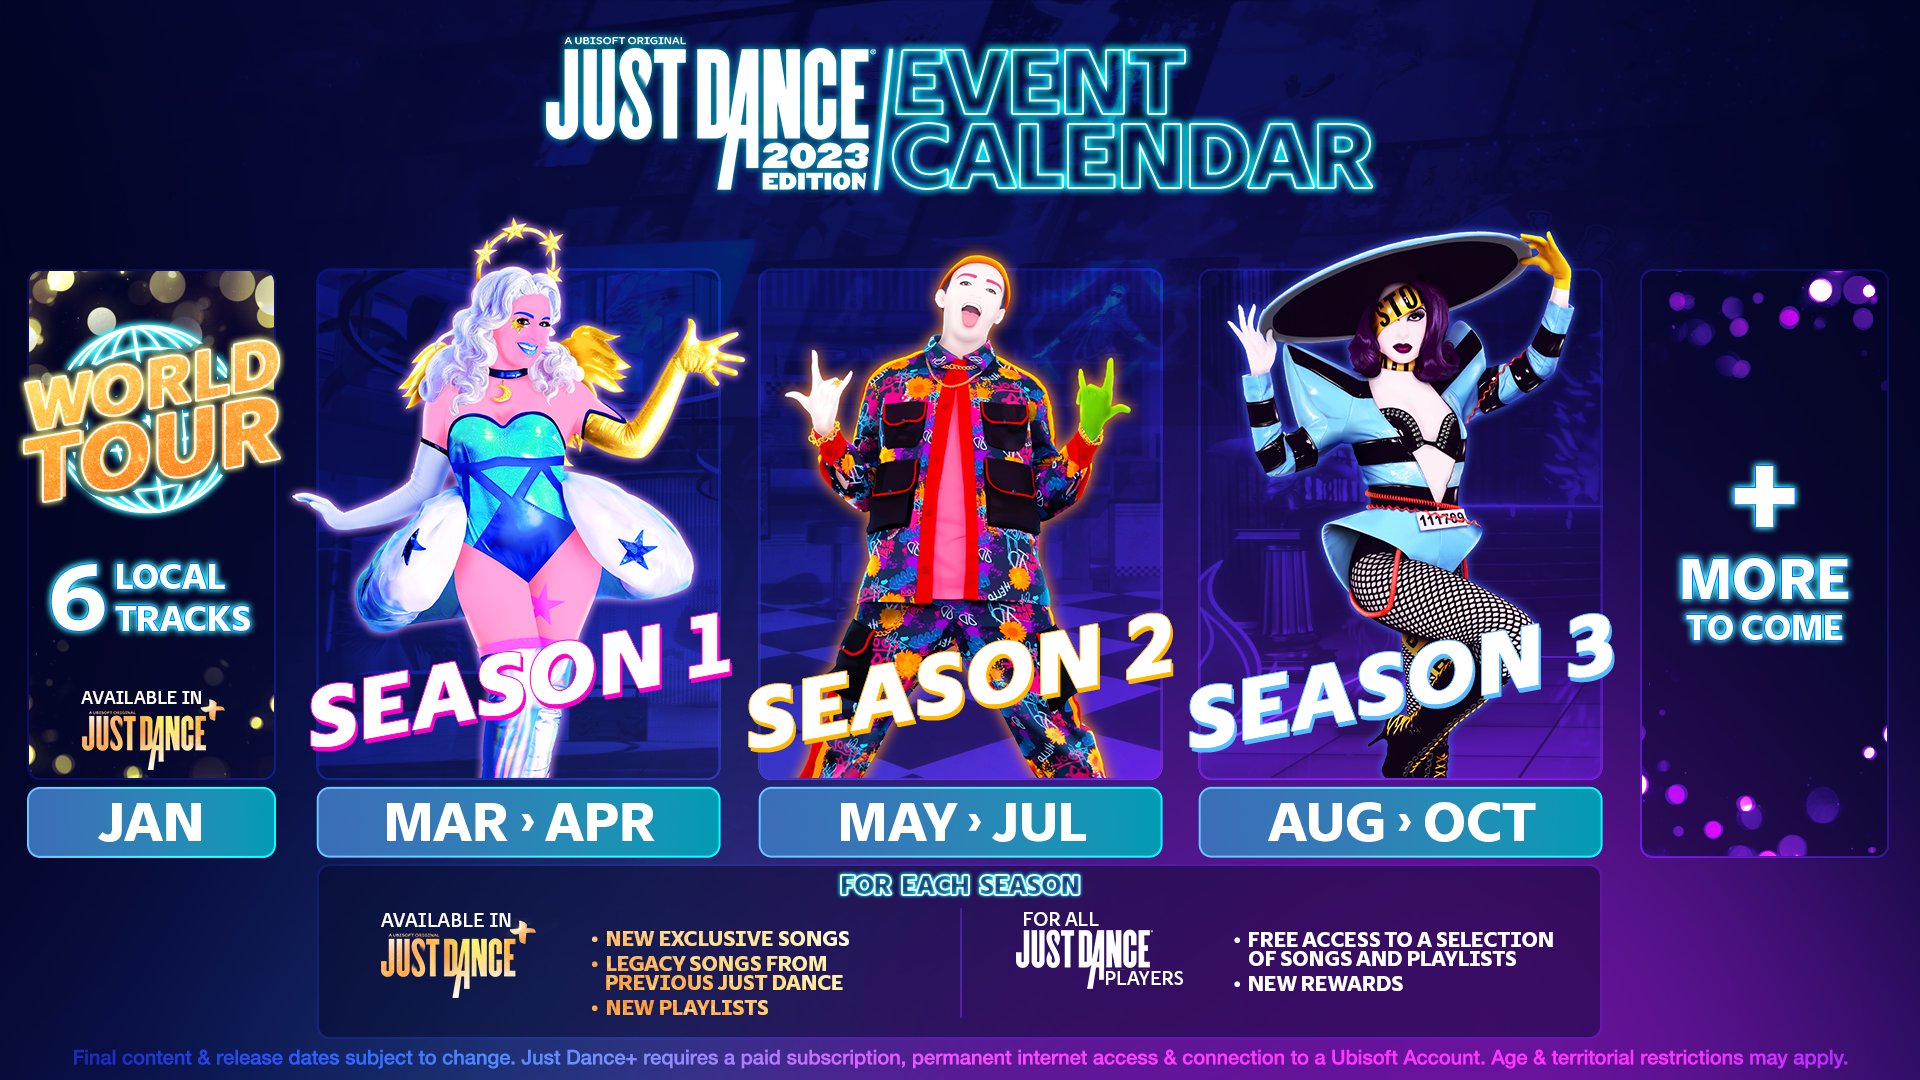 Just Dance 2024 Edition on X: Keep your eyes on the dancefloor! 👀 🕺  We've got a handy-dandy Event Calendar for you right here for what we're  planning throughout 2023! Let's make